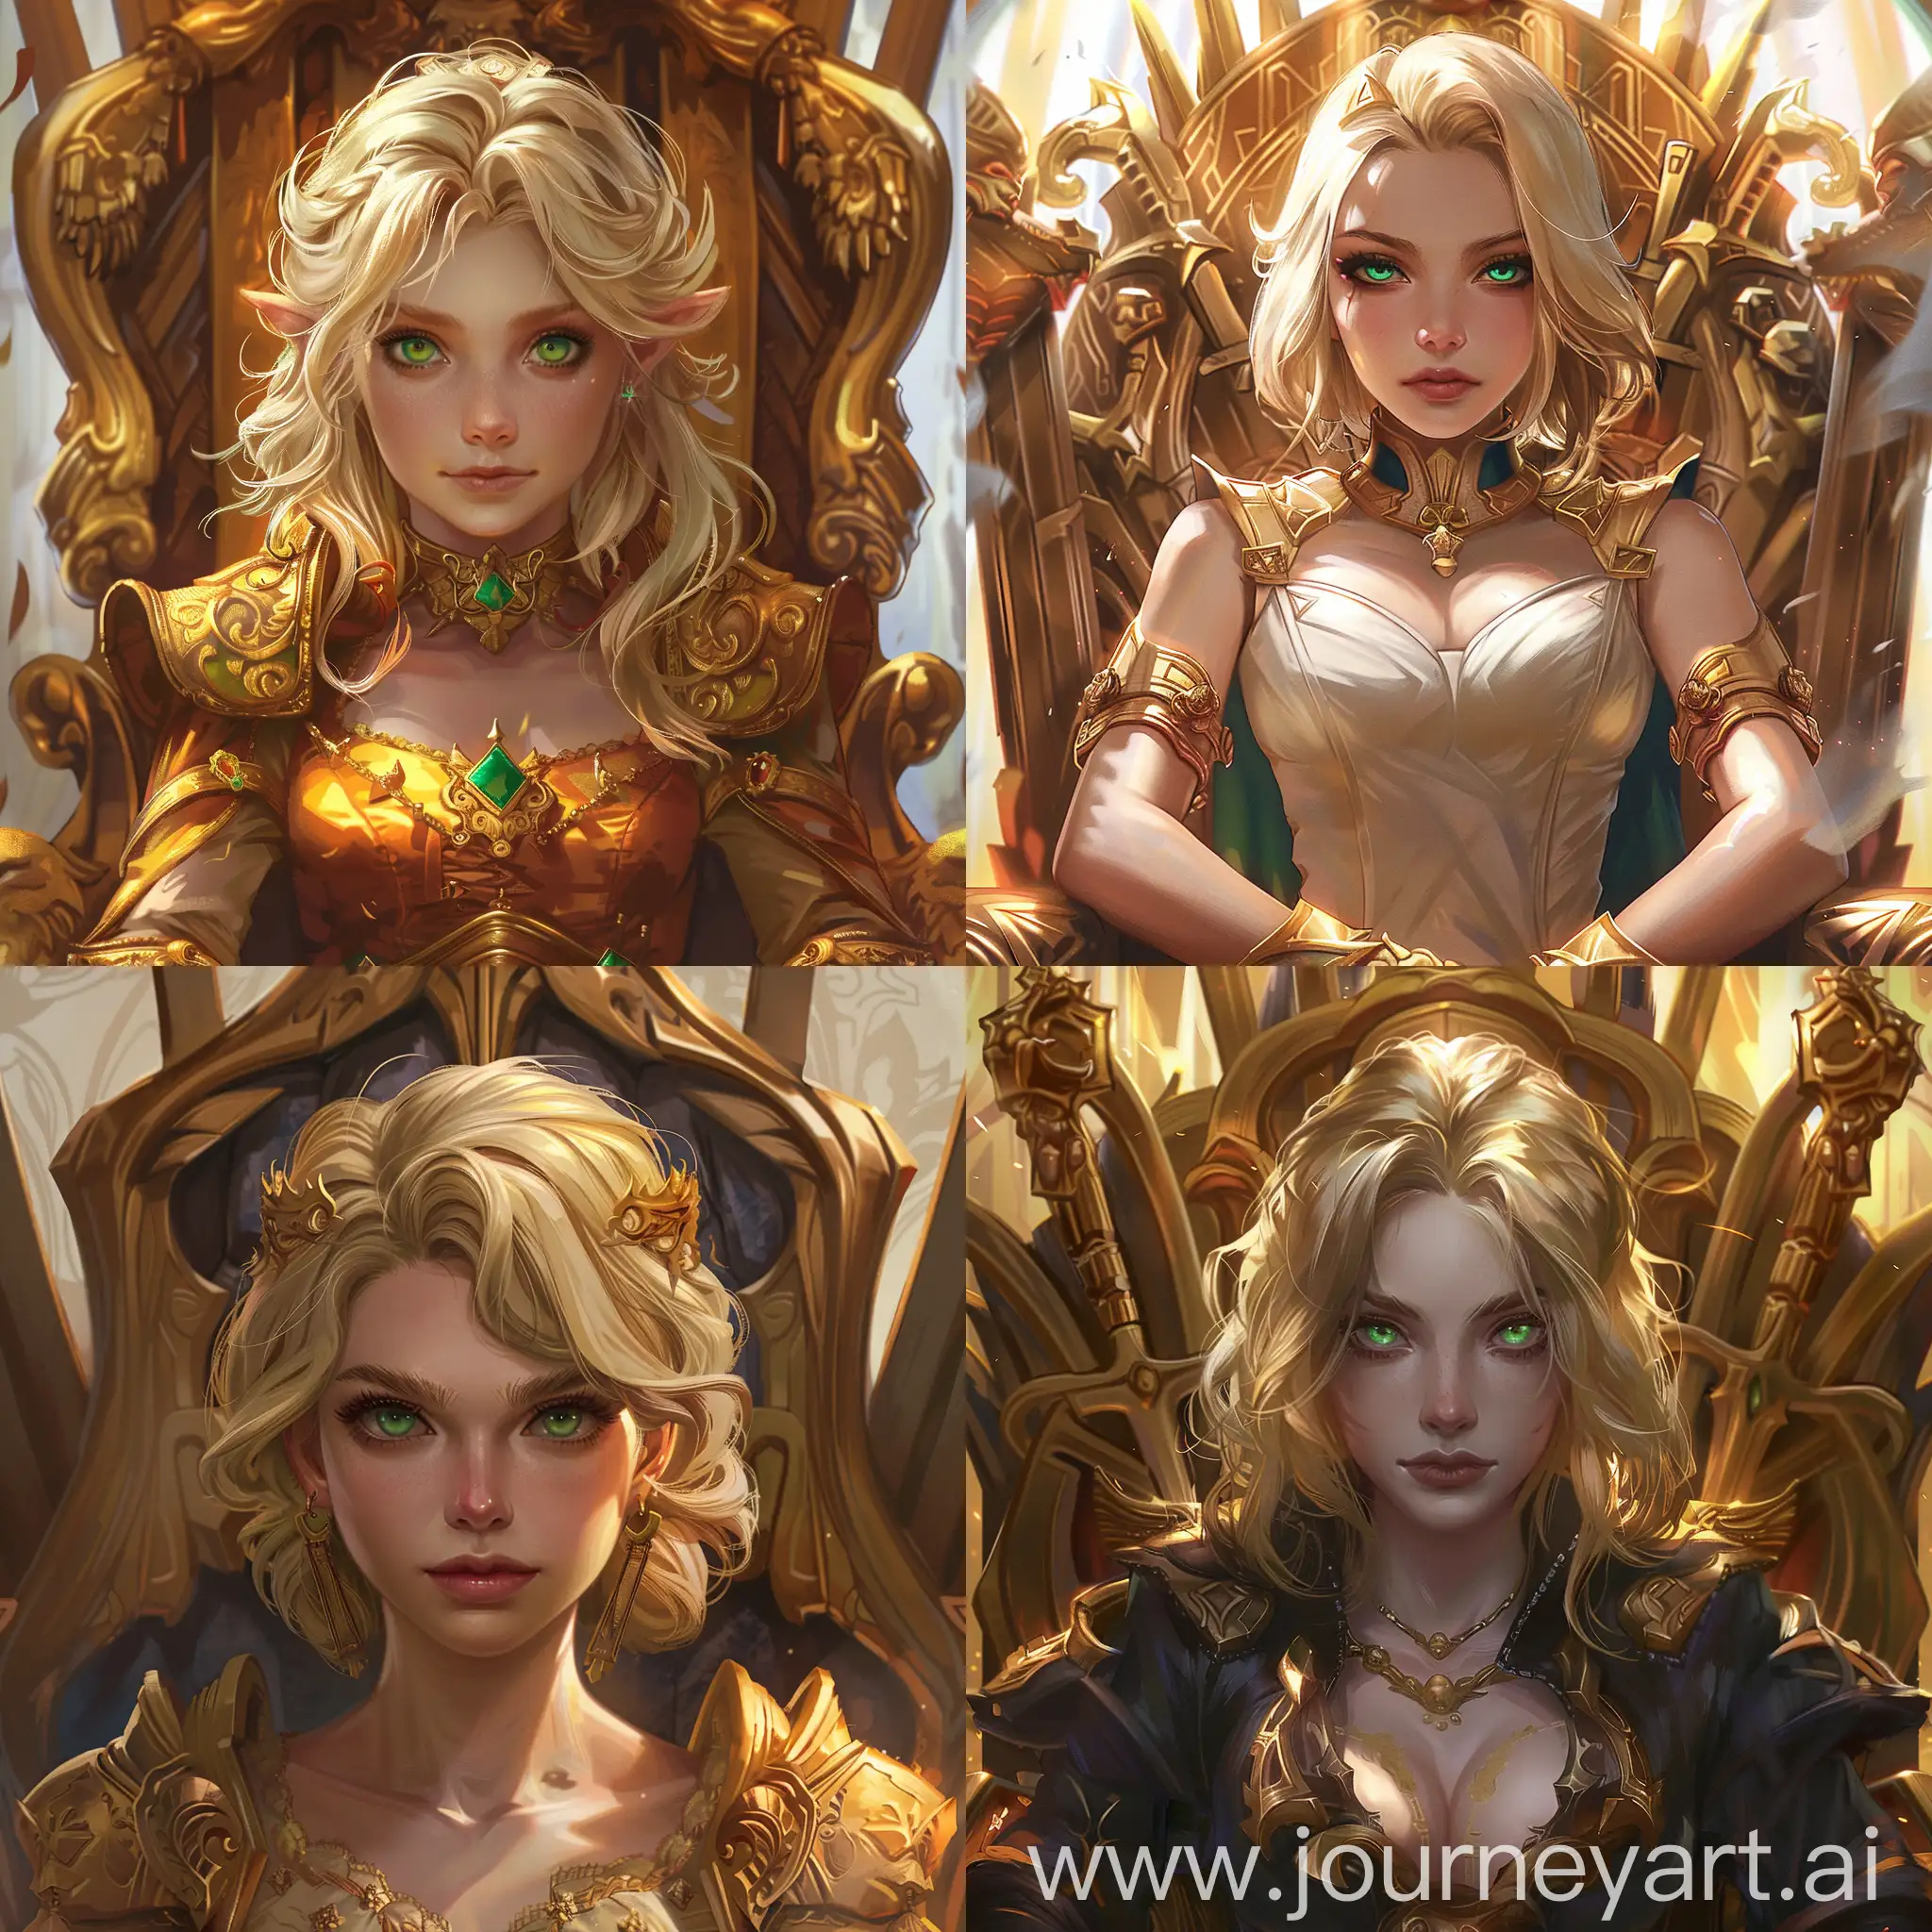 The beautiful and bitchy Empress: a young blonde with green eyes, confidently sits on a majestic throne made of gold. Her gaze is full of power and pride, hinting at her unwavering rule. 